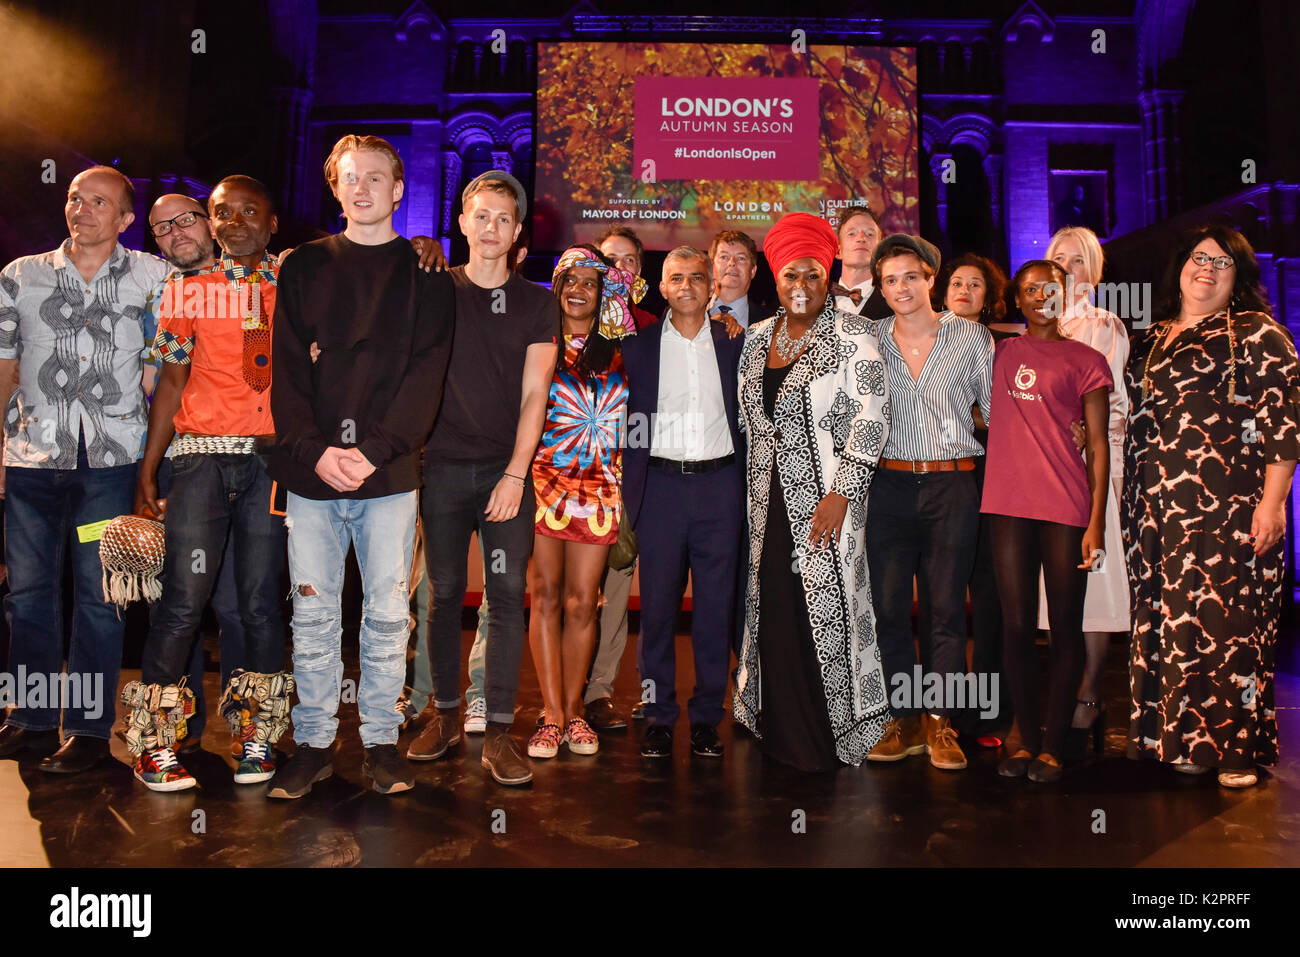 London, UK.  31 August 2017. The Vamps, Sir Michael Dixon, Director of The Natural History Museum, a member of Ballet Black,  Jumoké Fashola, Justine Simmonds, Deputy Mayor for Culture, Amy Lame, Night Tsar join Mayor of London, Sadiq Khan, to launch London’s Autumn Season at the Natural History Museum, shining a spotlight on the world-leading cultural exhibitions and events taking place across the capital during the months ahead.   Credit: Stephen Chung / Alamy Live News Stock Photo